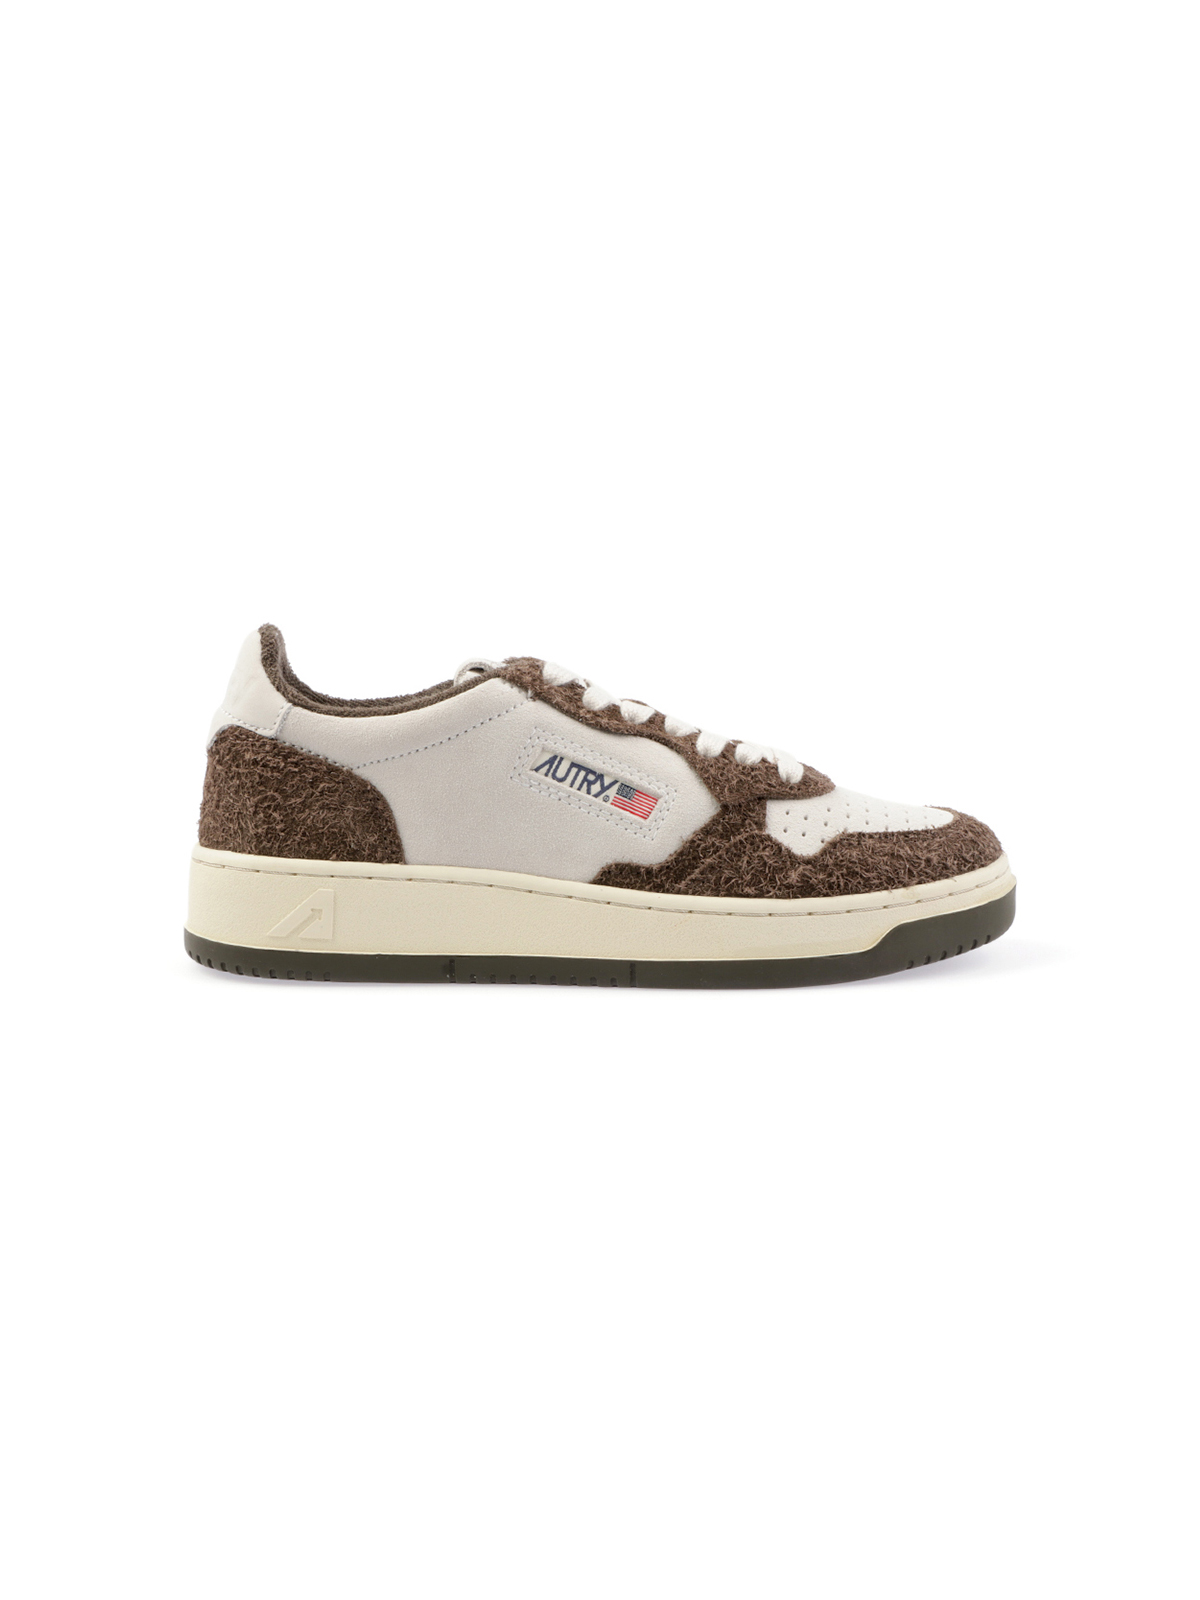 Immagine di AUTRY | Sneakers Donna Medalist Low in Hairy Suede Bicolore